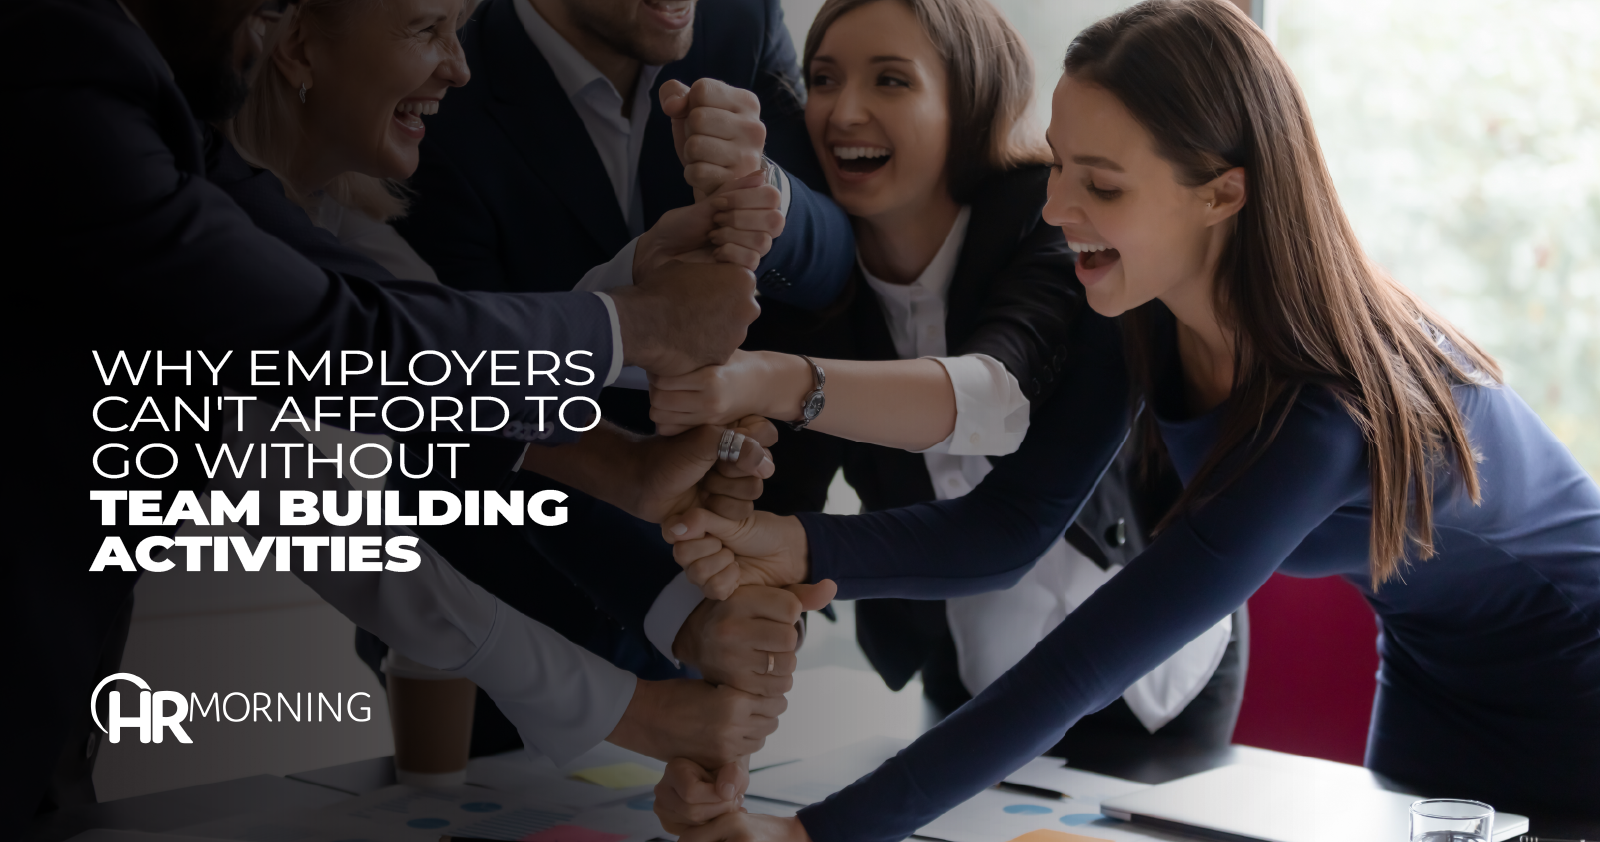 Why employers can't afford to go without team building activities